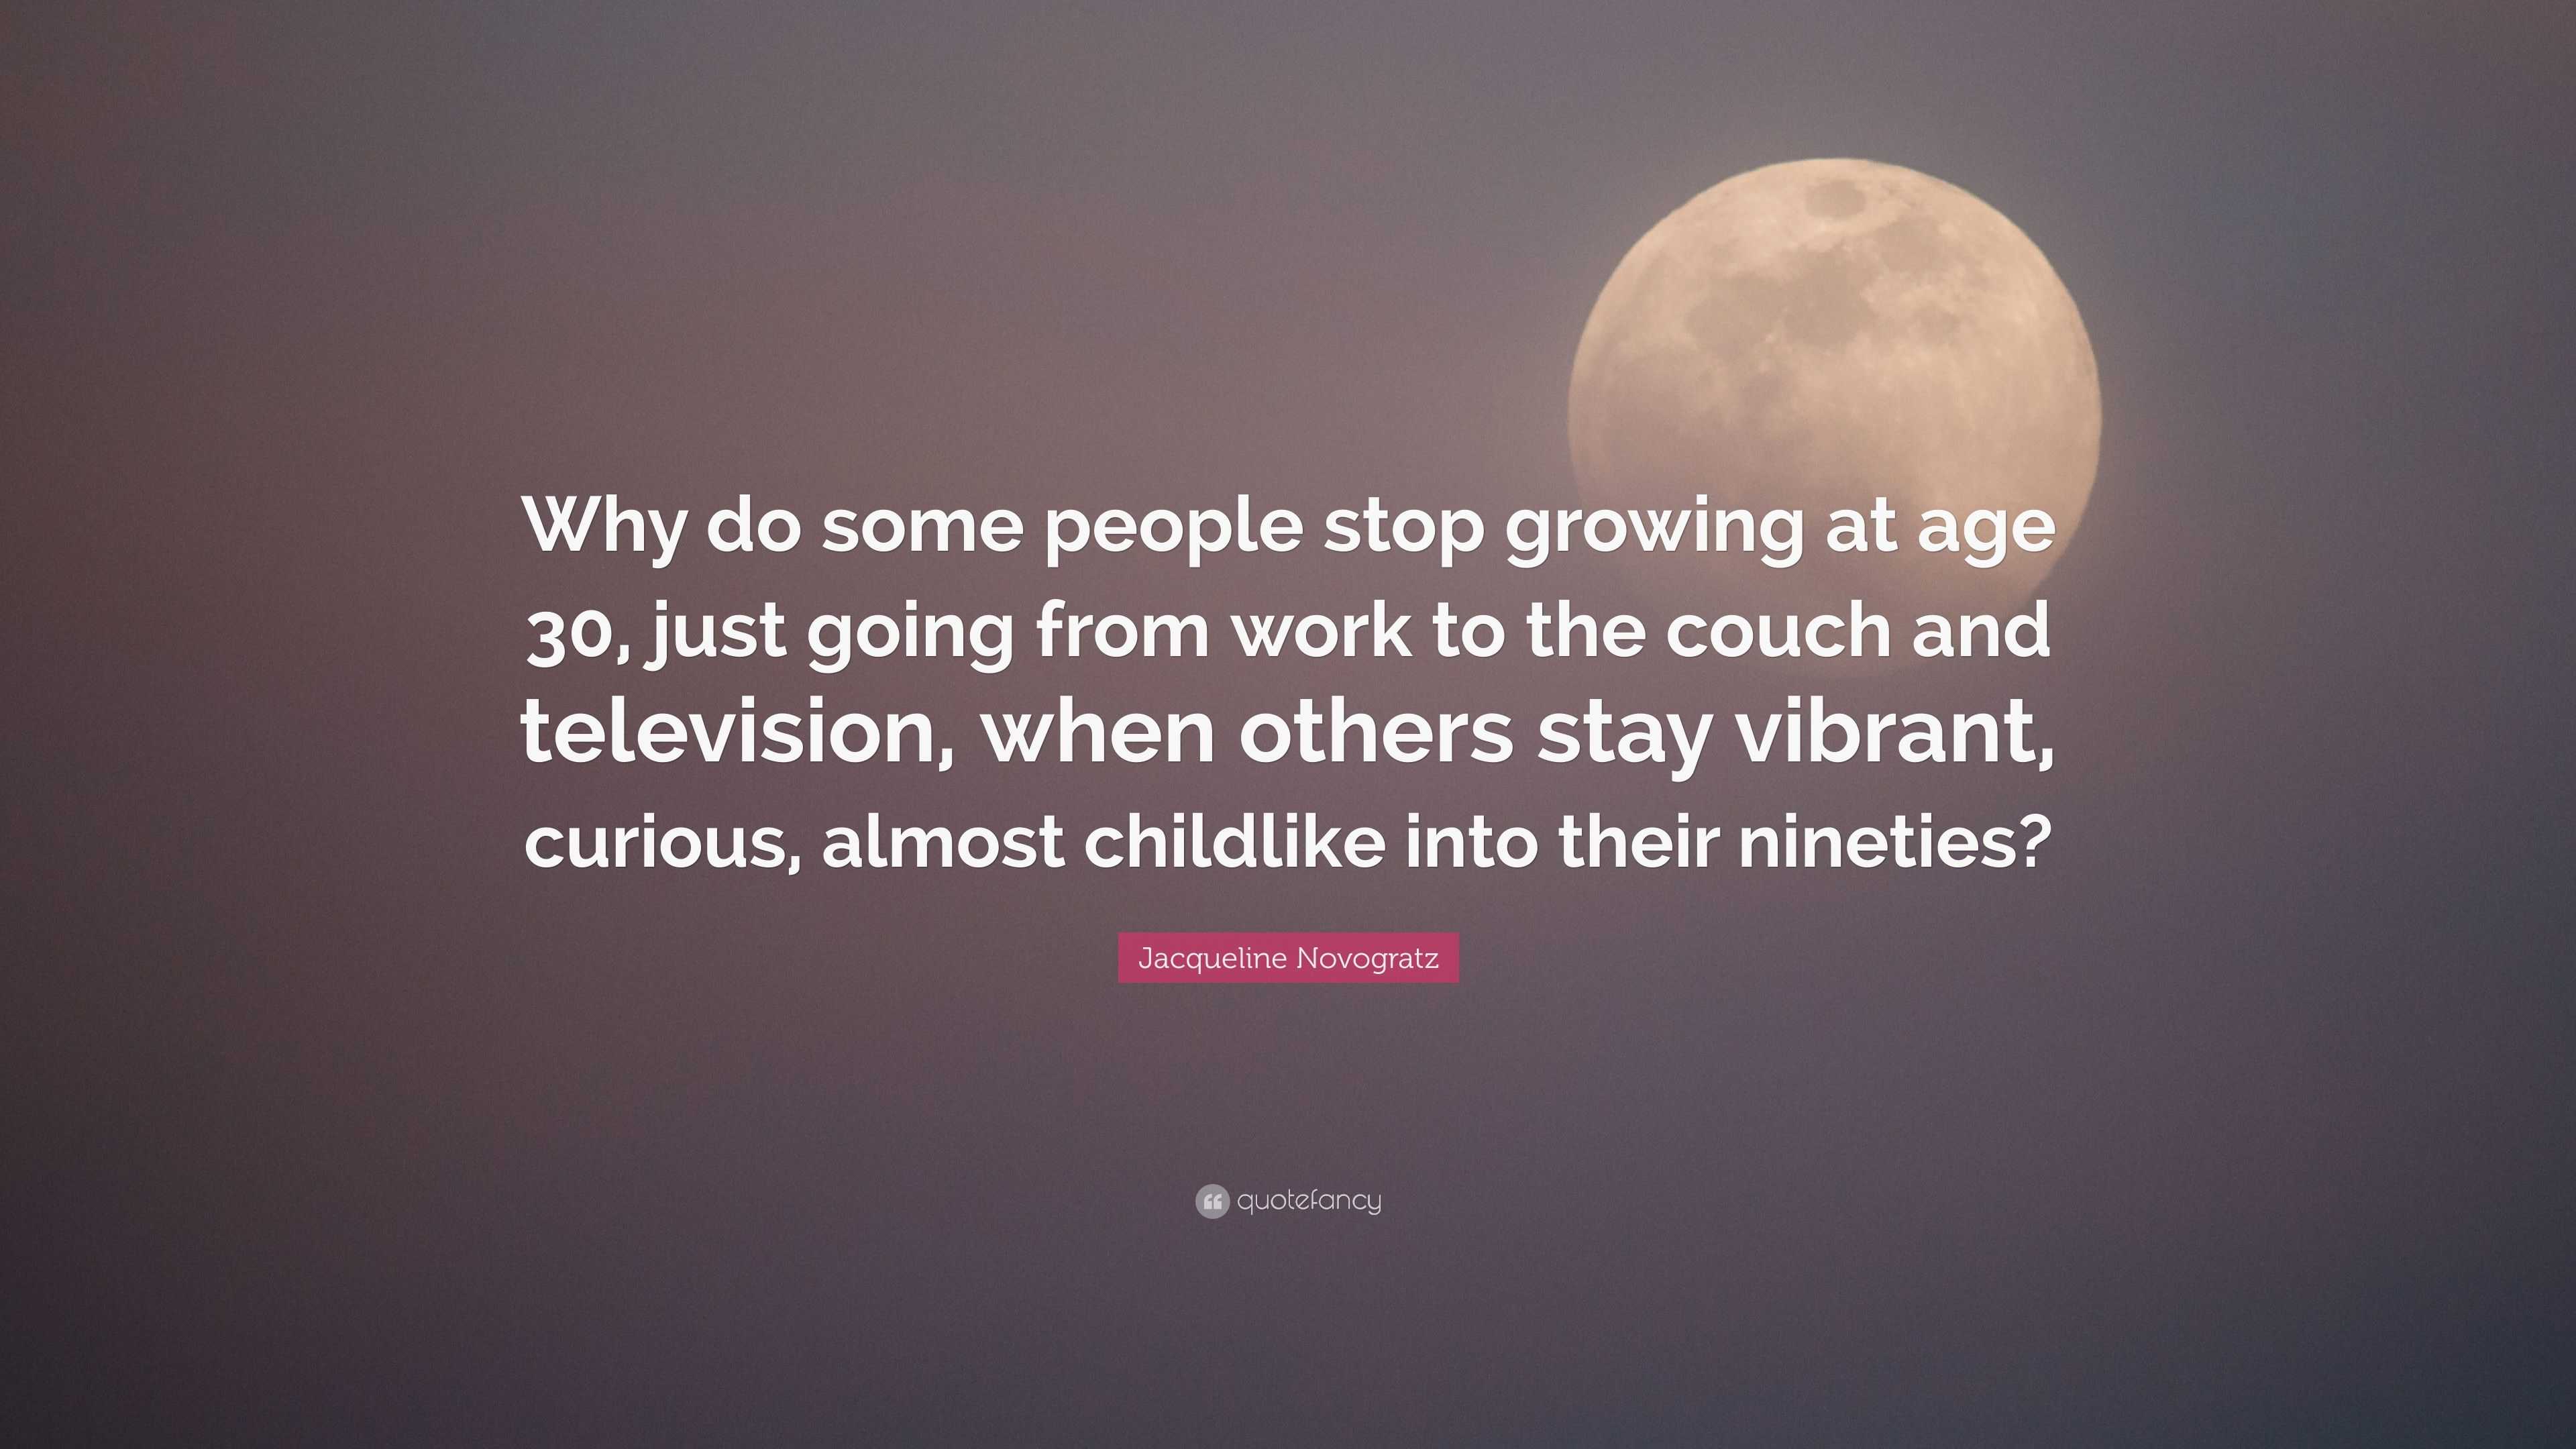 Jacqueline Novogratz Quote “why Do Some People Stop Growing At Age 30